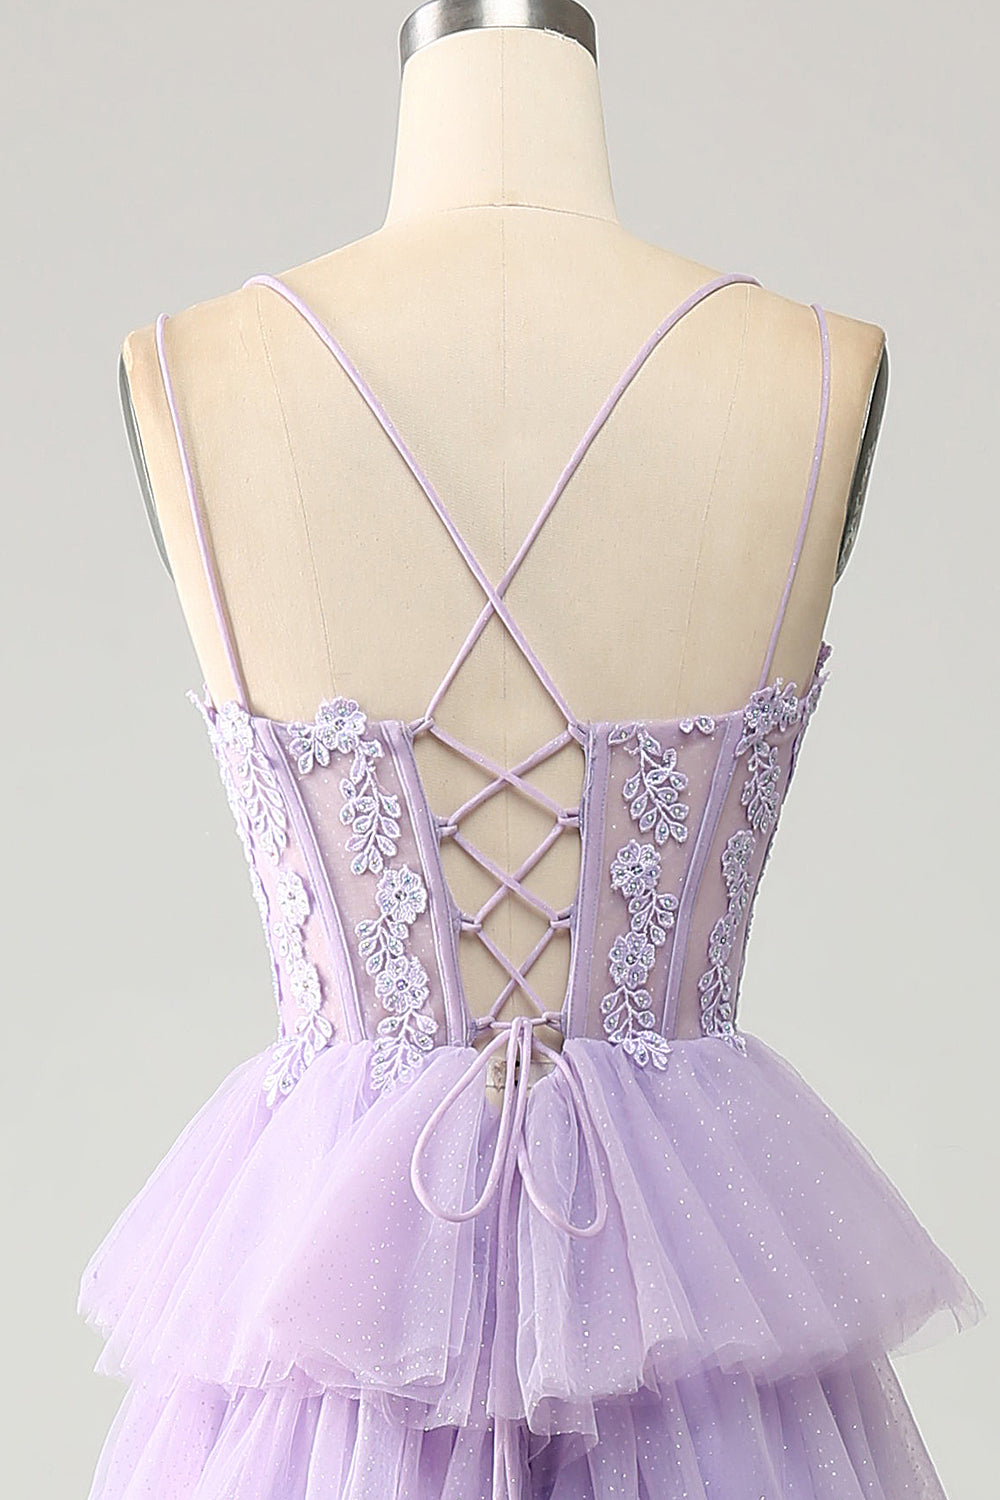 Lilac Tulle Tiered Princess Corset Prom Dress with Appliques